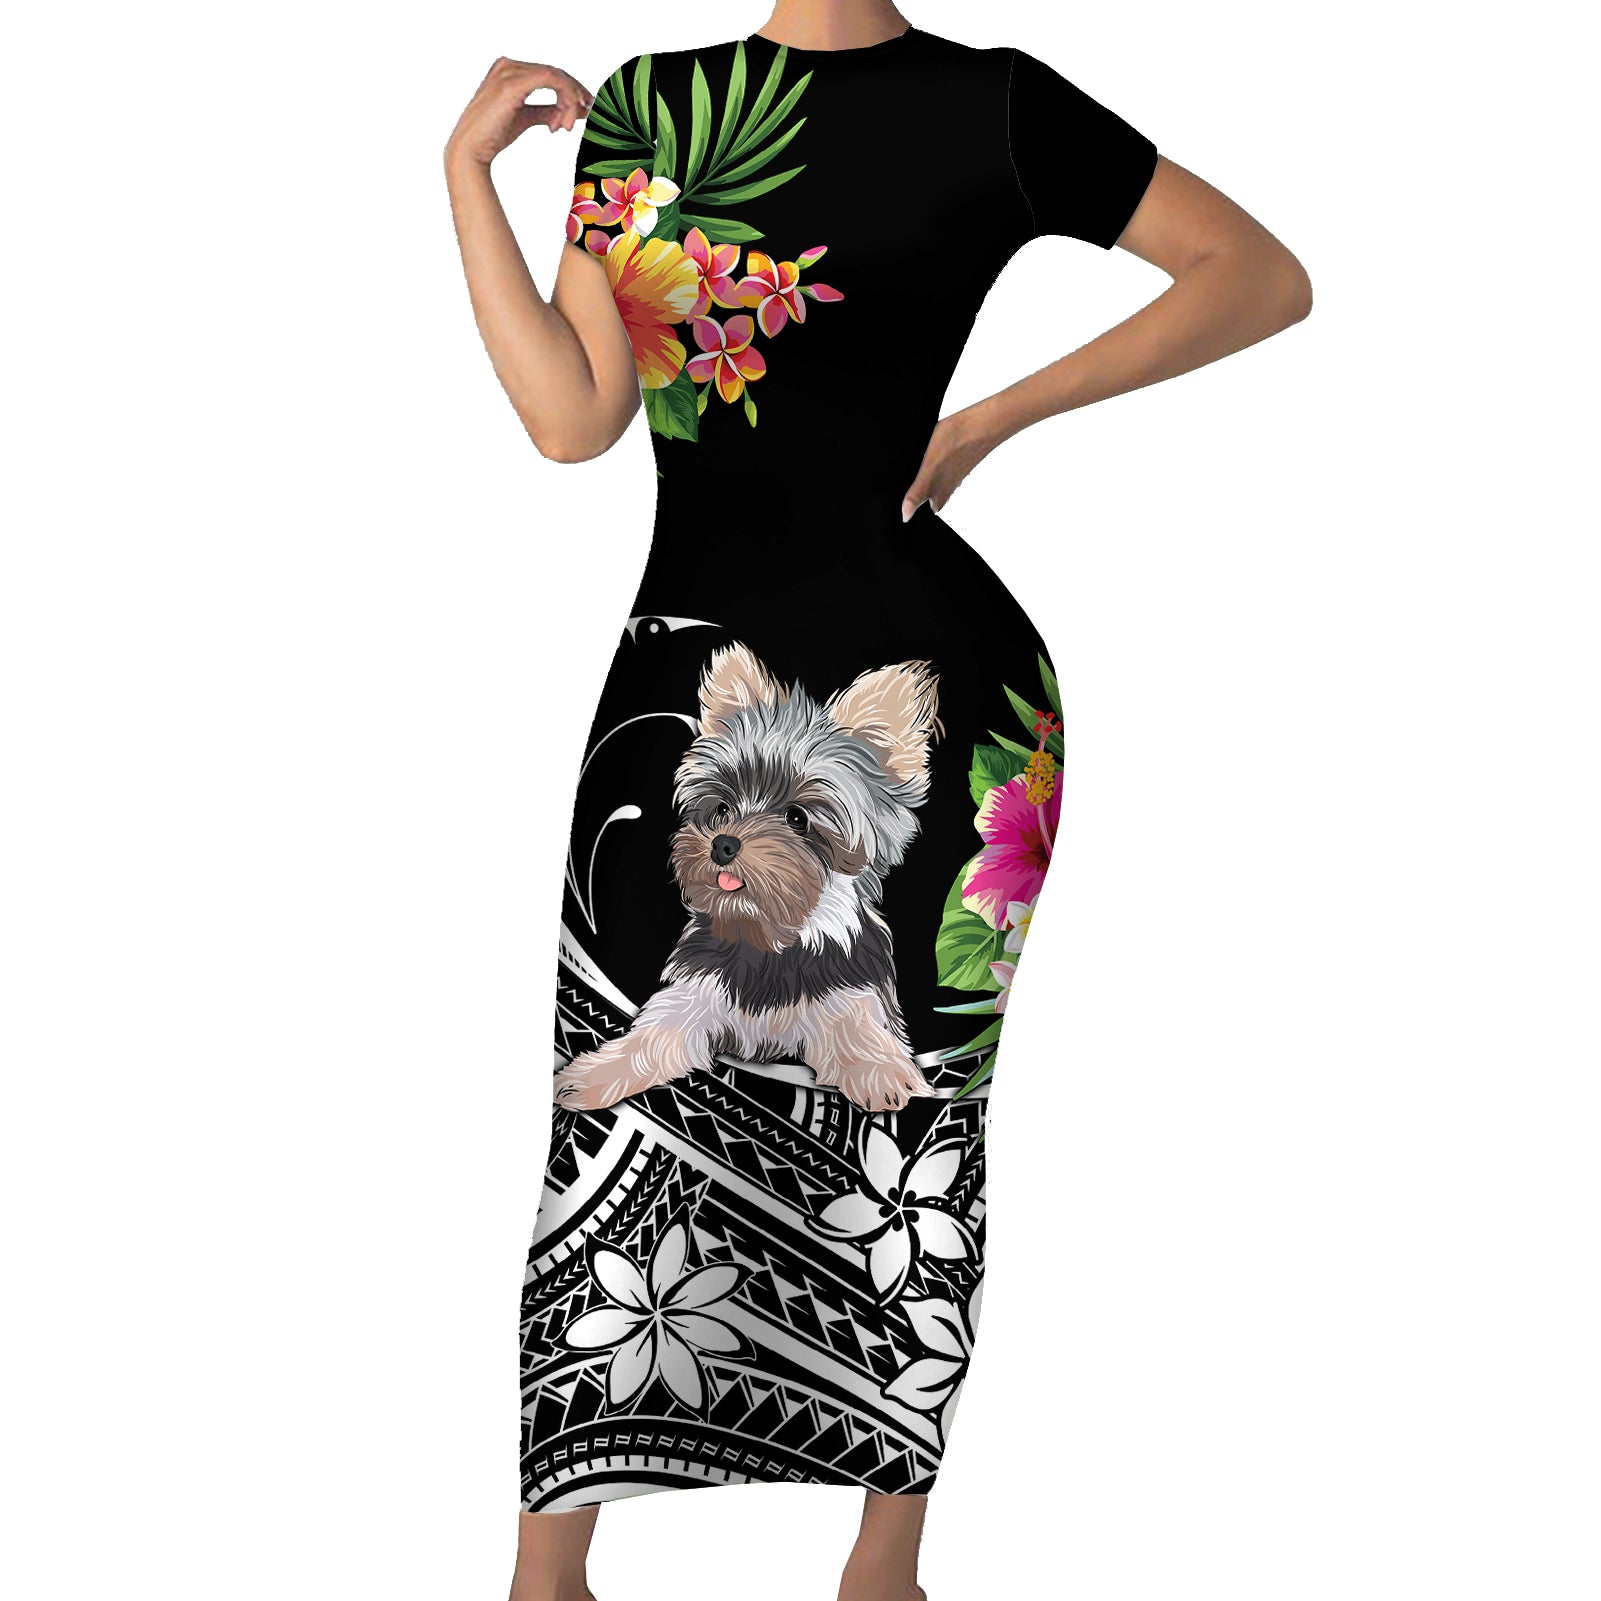 Personalised Polynesian Short Sleeve Bodycon Dress With Yorkshire Terrier Floral Style LT7 Long Dress Black - Polynesian Pride